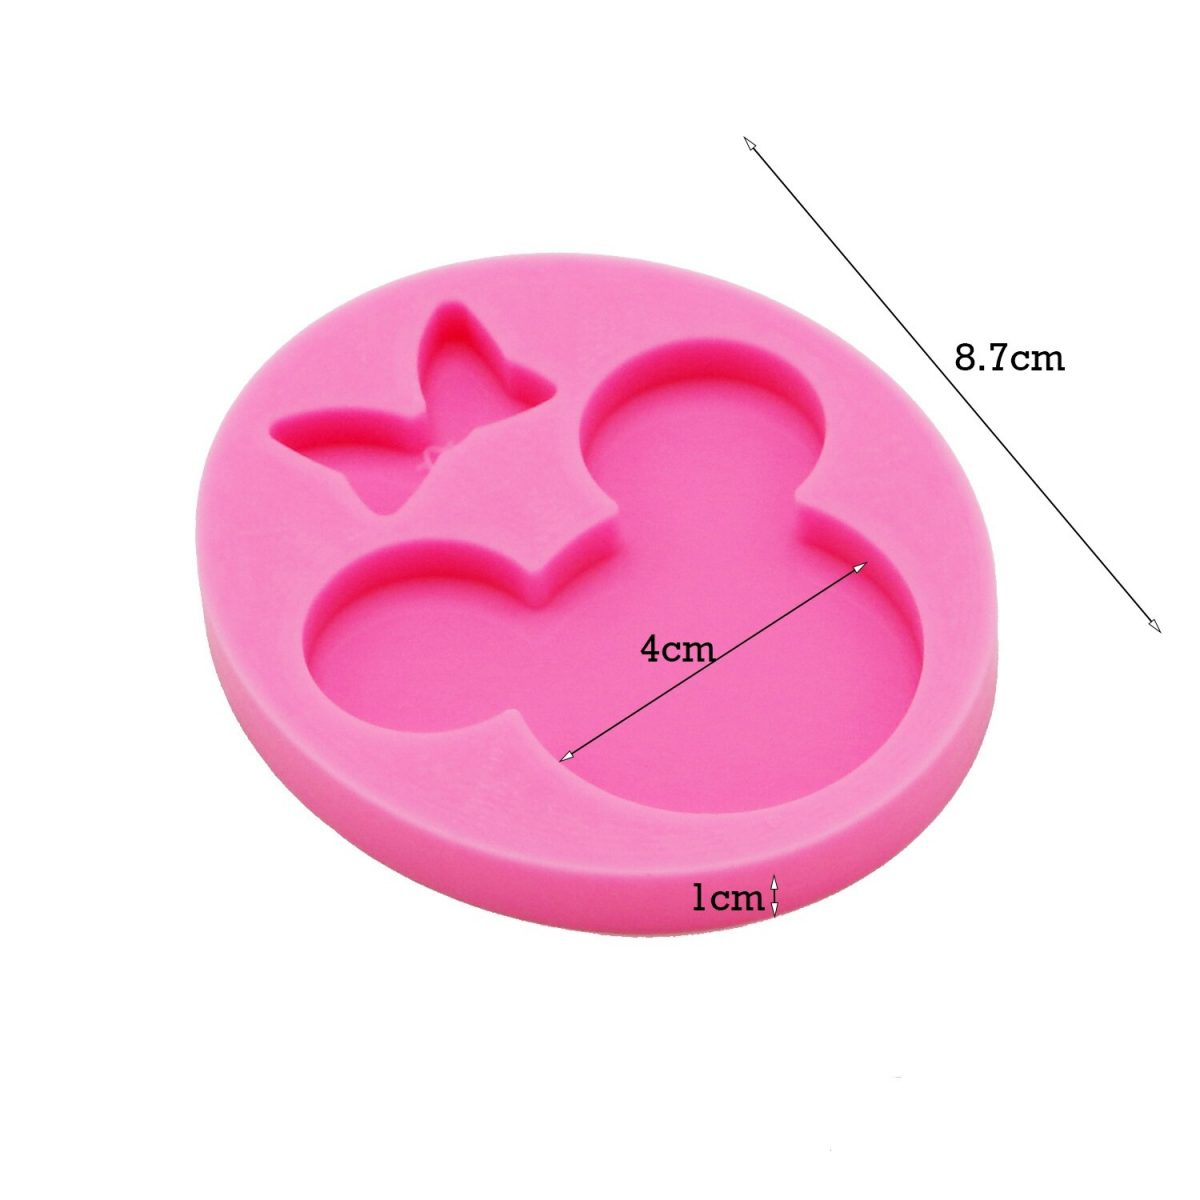 mouse-bow-silicone-mold-157196-inches--cake-decorating-mold-resin-gumpaste-fondant-sugar-craft-mold